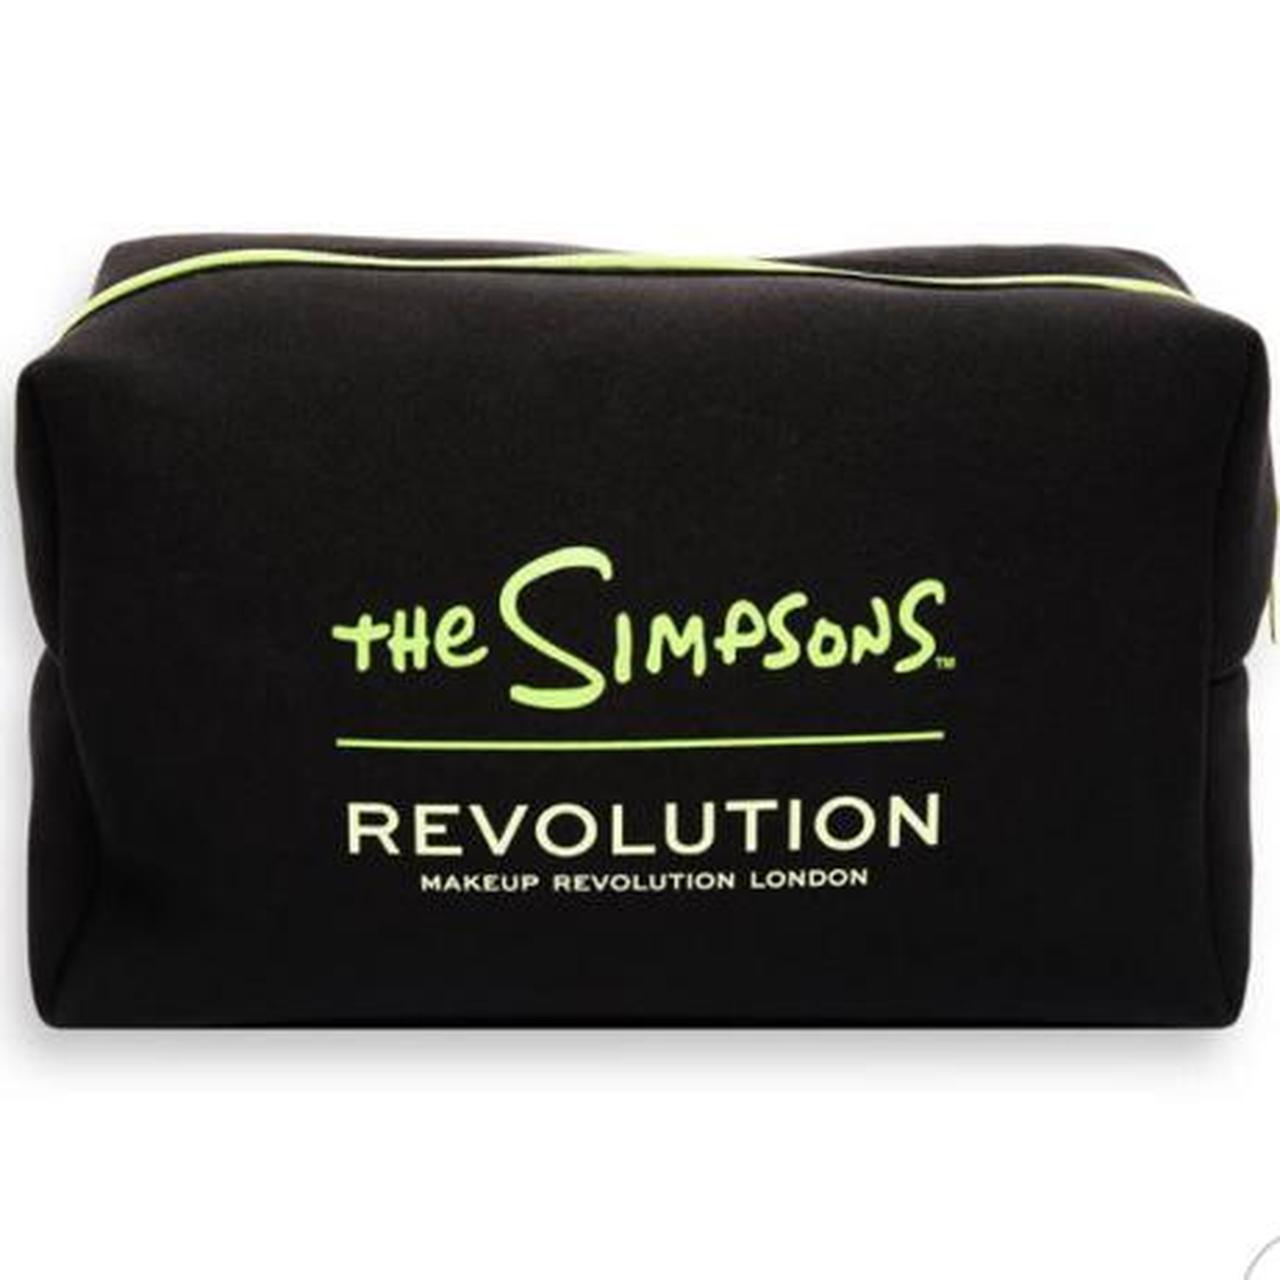 Product Image 3 - This makeup bag is spacious